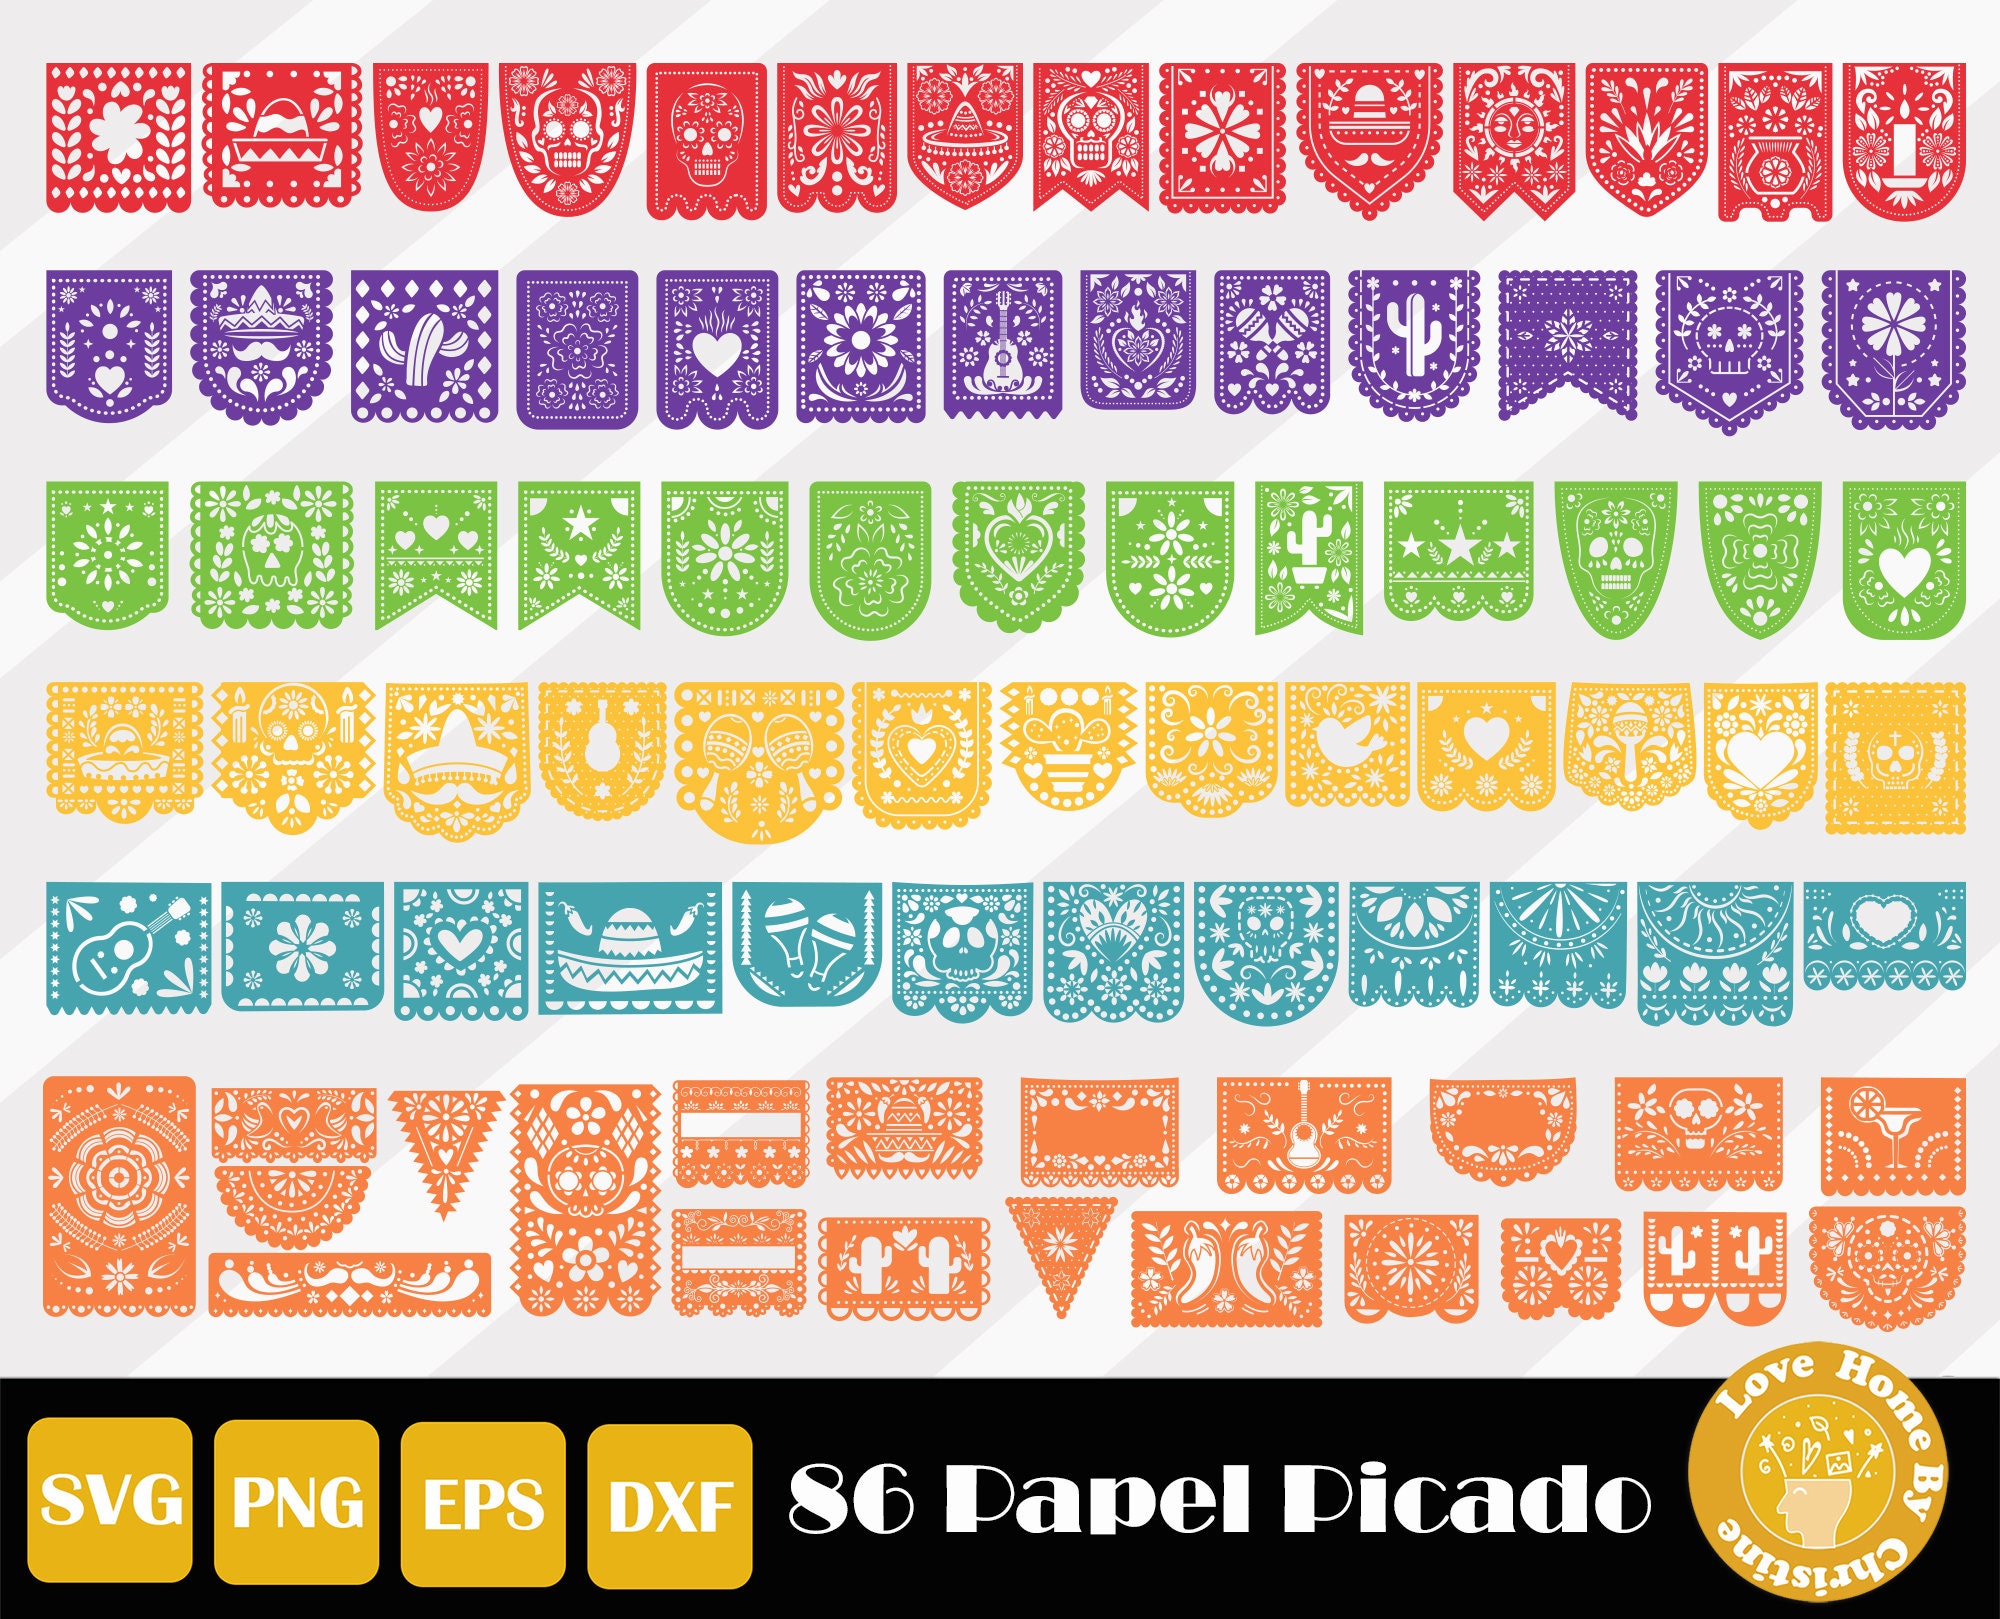 Mexican Party Banners (5 Pack with 10 Unique Plastic Flag Designs